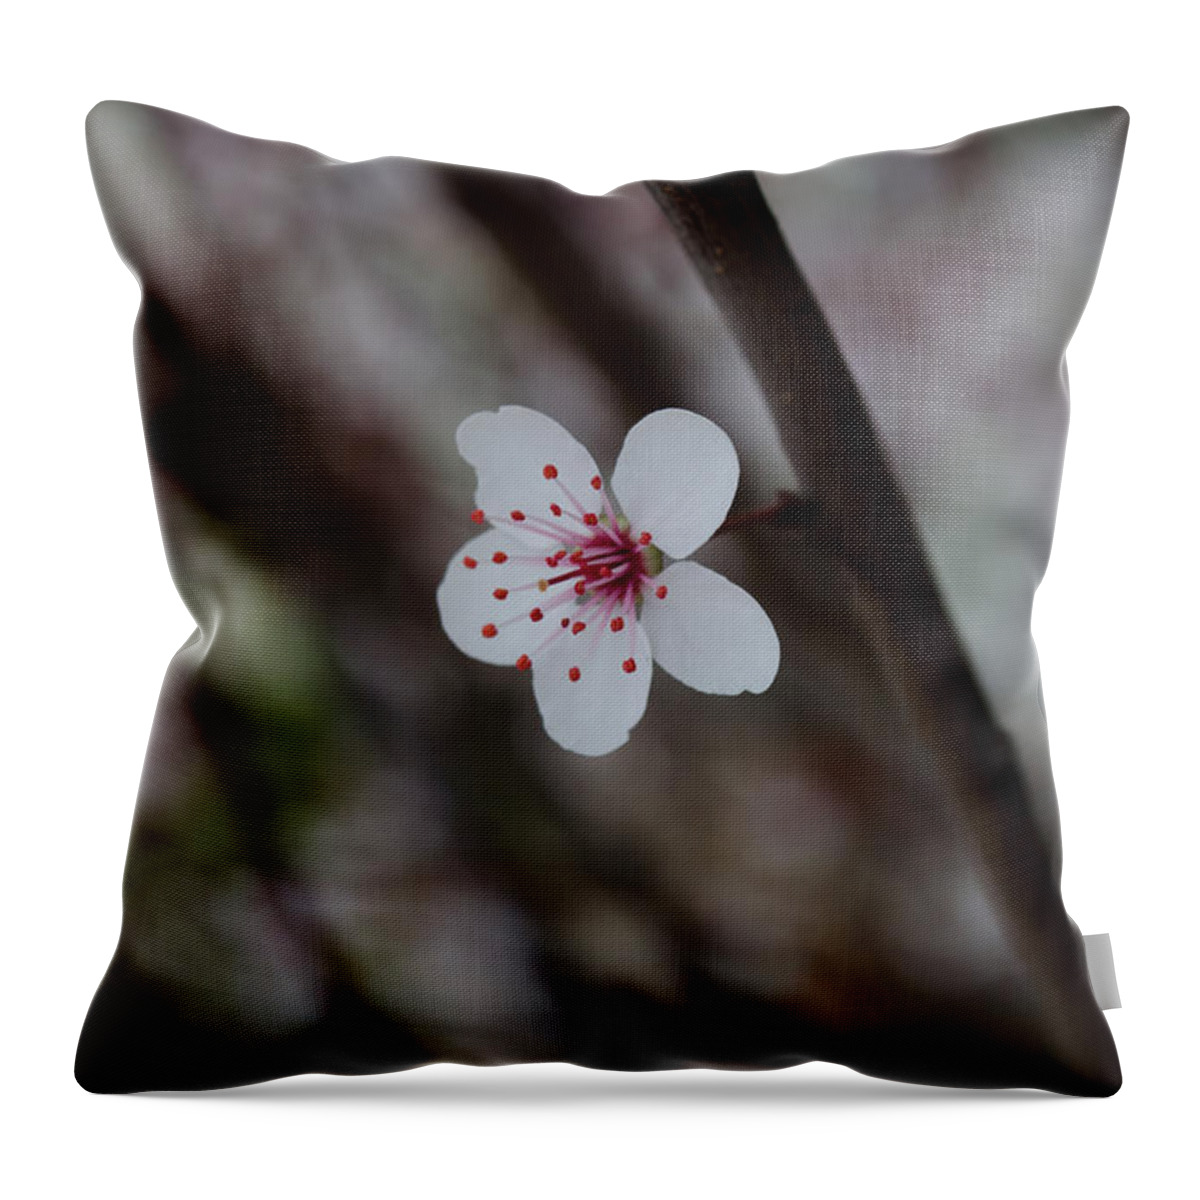 Flower Throw Pillow featuring the photograph Flowering Plum 3 by Michael Arend